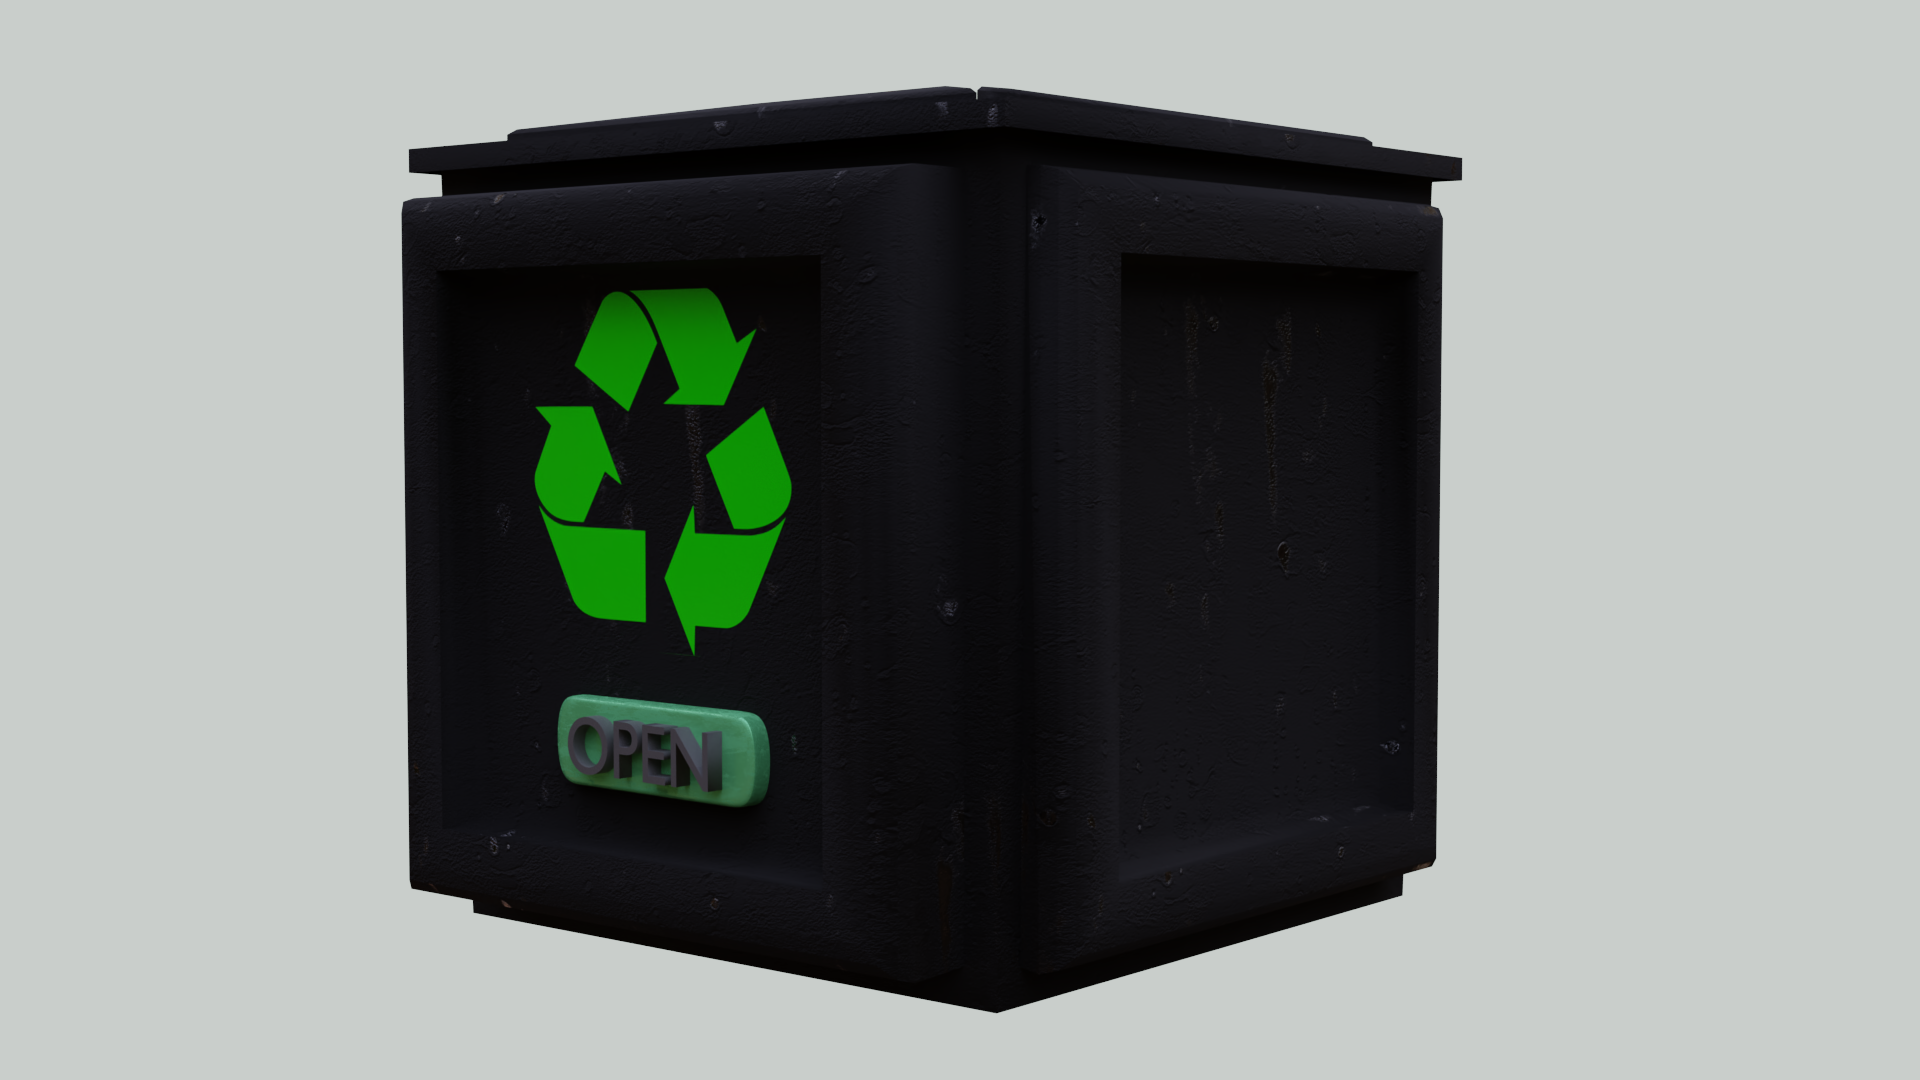 Trashcan preview image 1